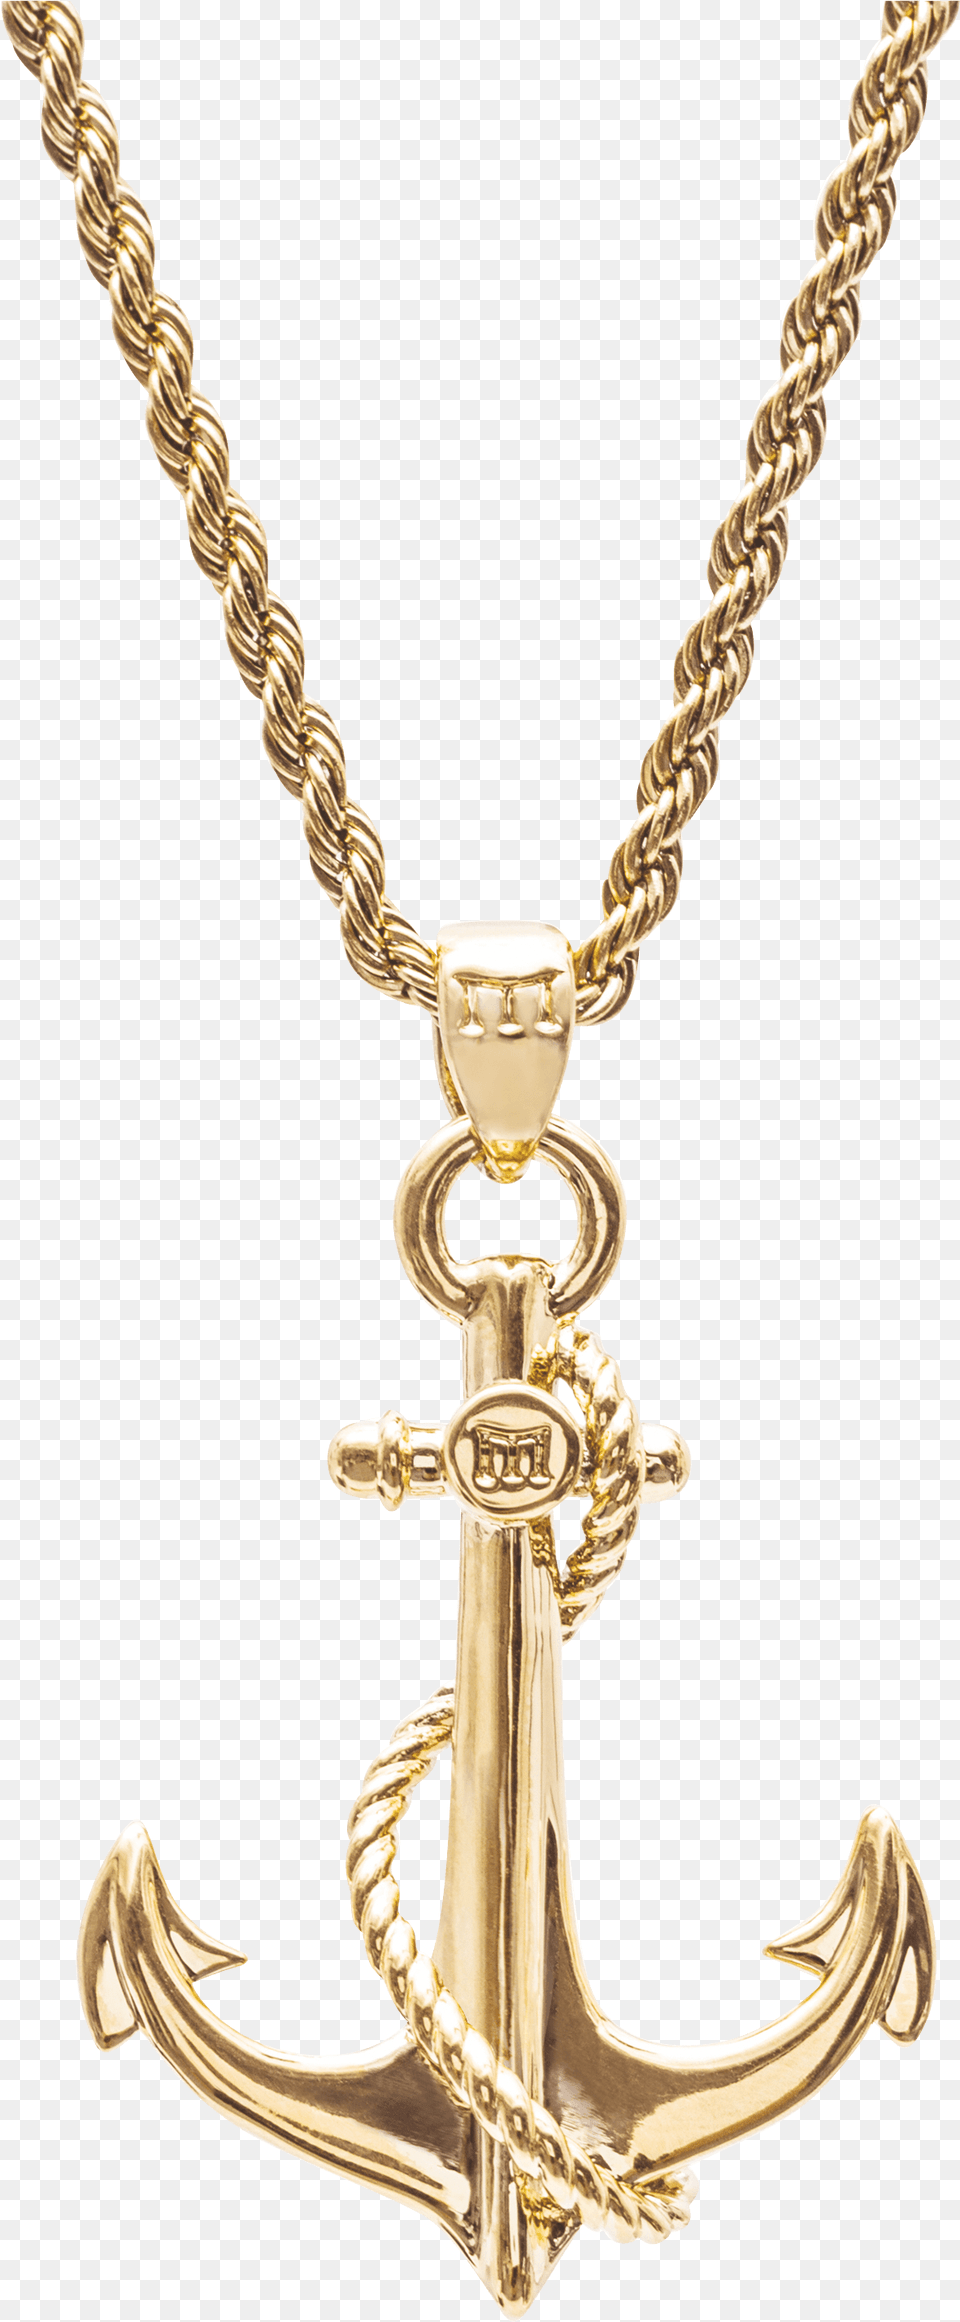 Anchor Chain Anchor Necklaces, Accessories, Electronics, Hardware, Jewelry Free Transparent Png